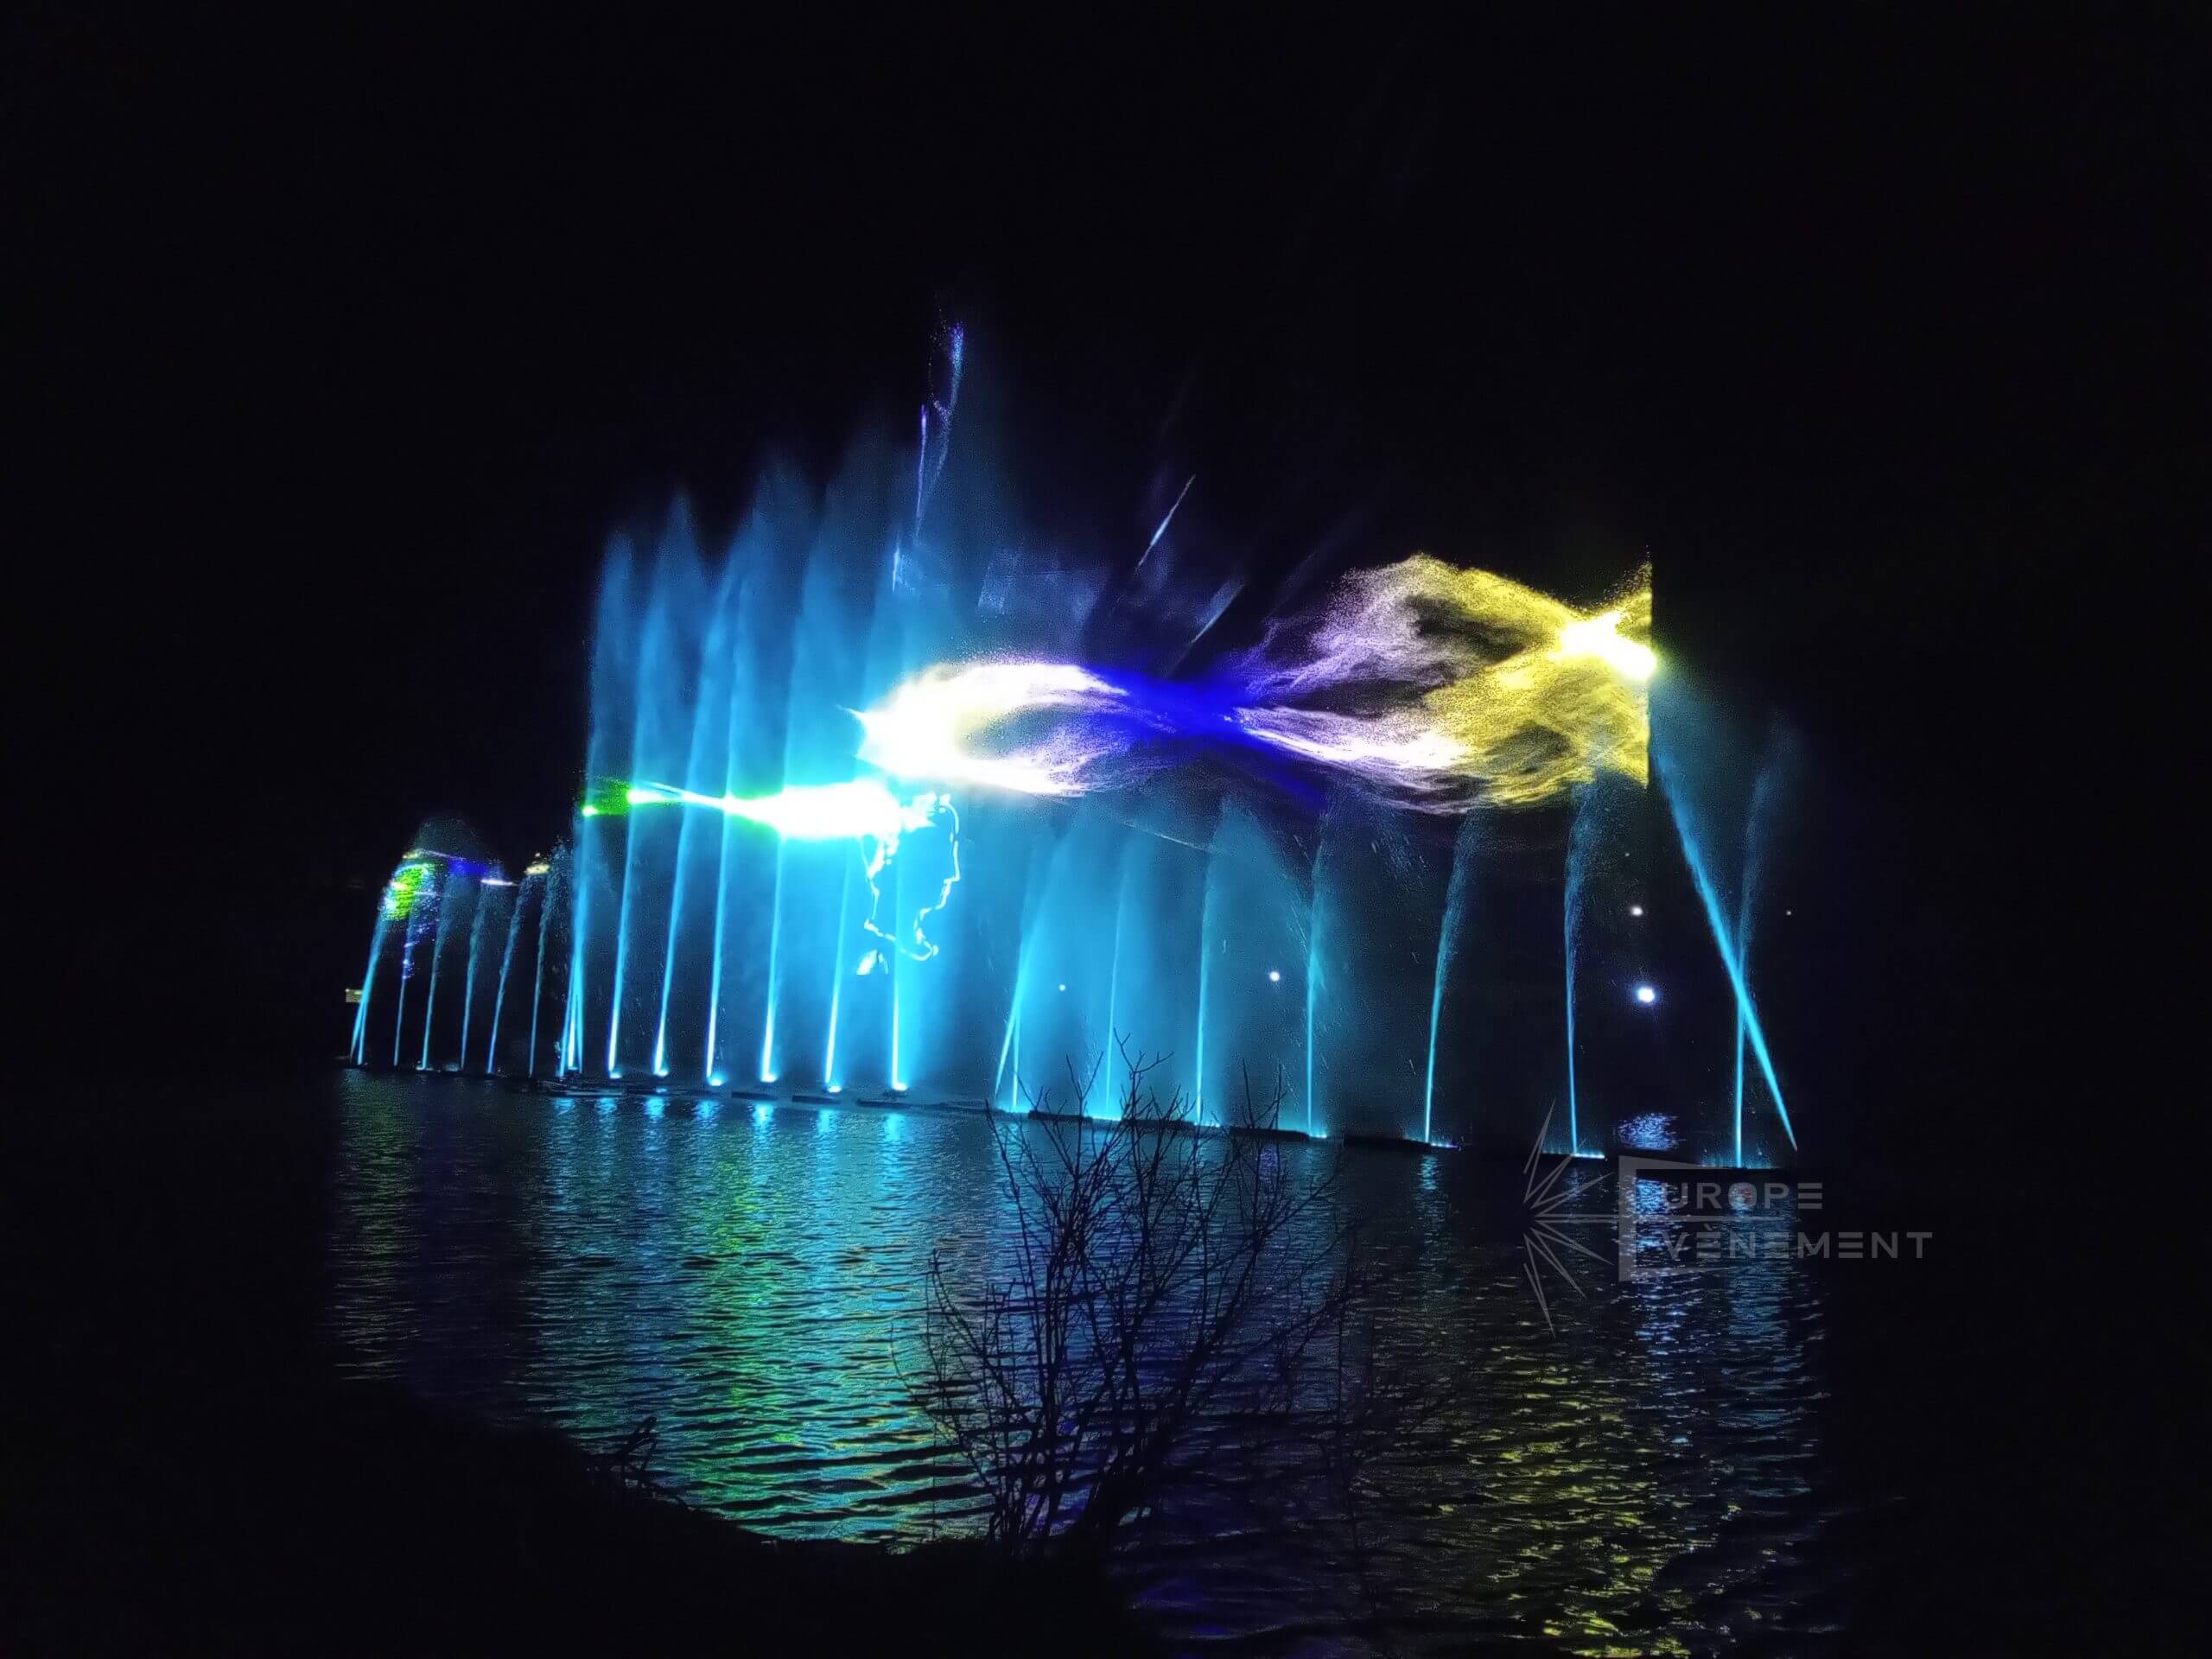 Atlantid - Projection of abstract laser shapes on water jets